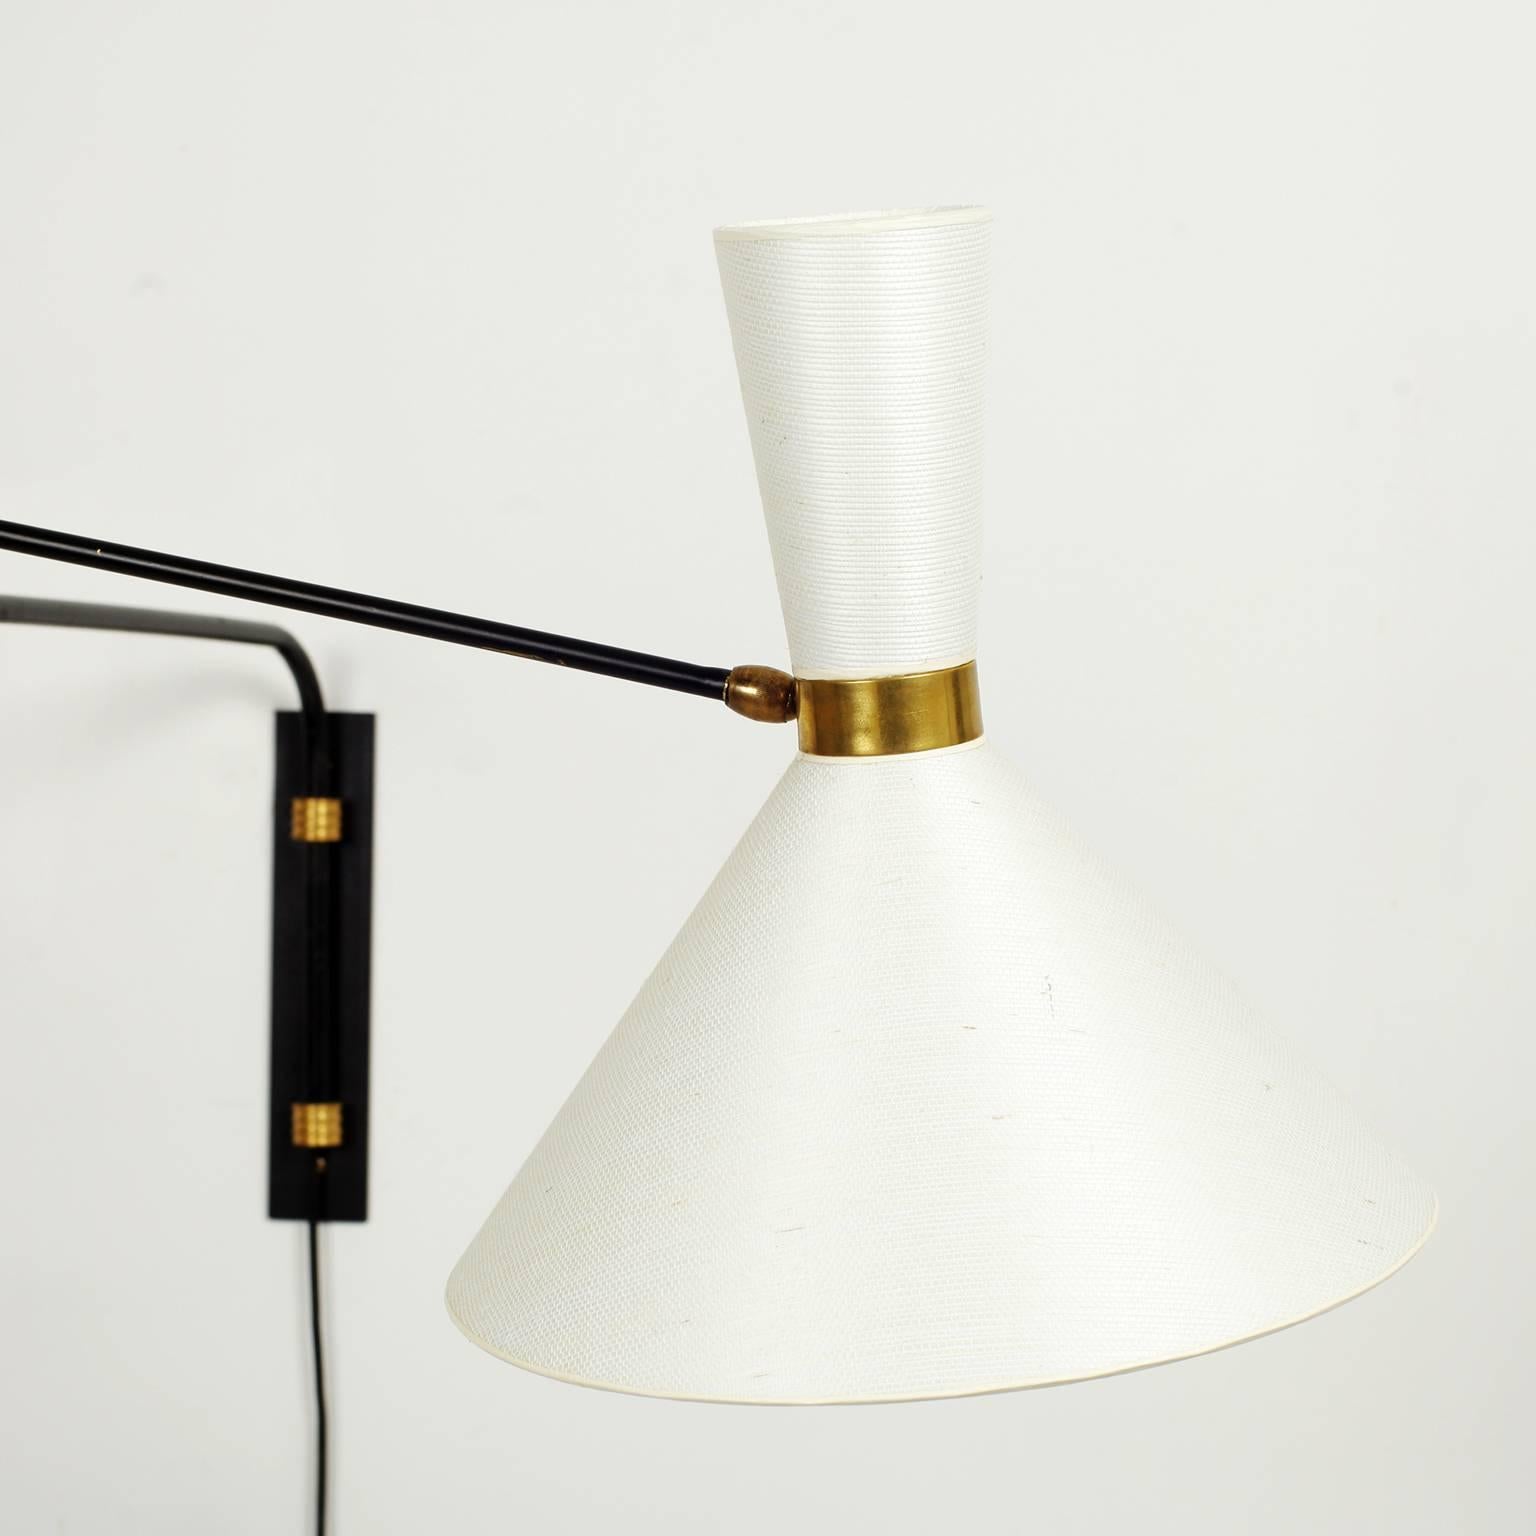 Mid-20th Century French Counter Balance and Swing Arm Wall Lamp, 1950